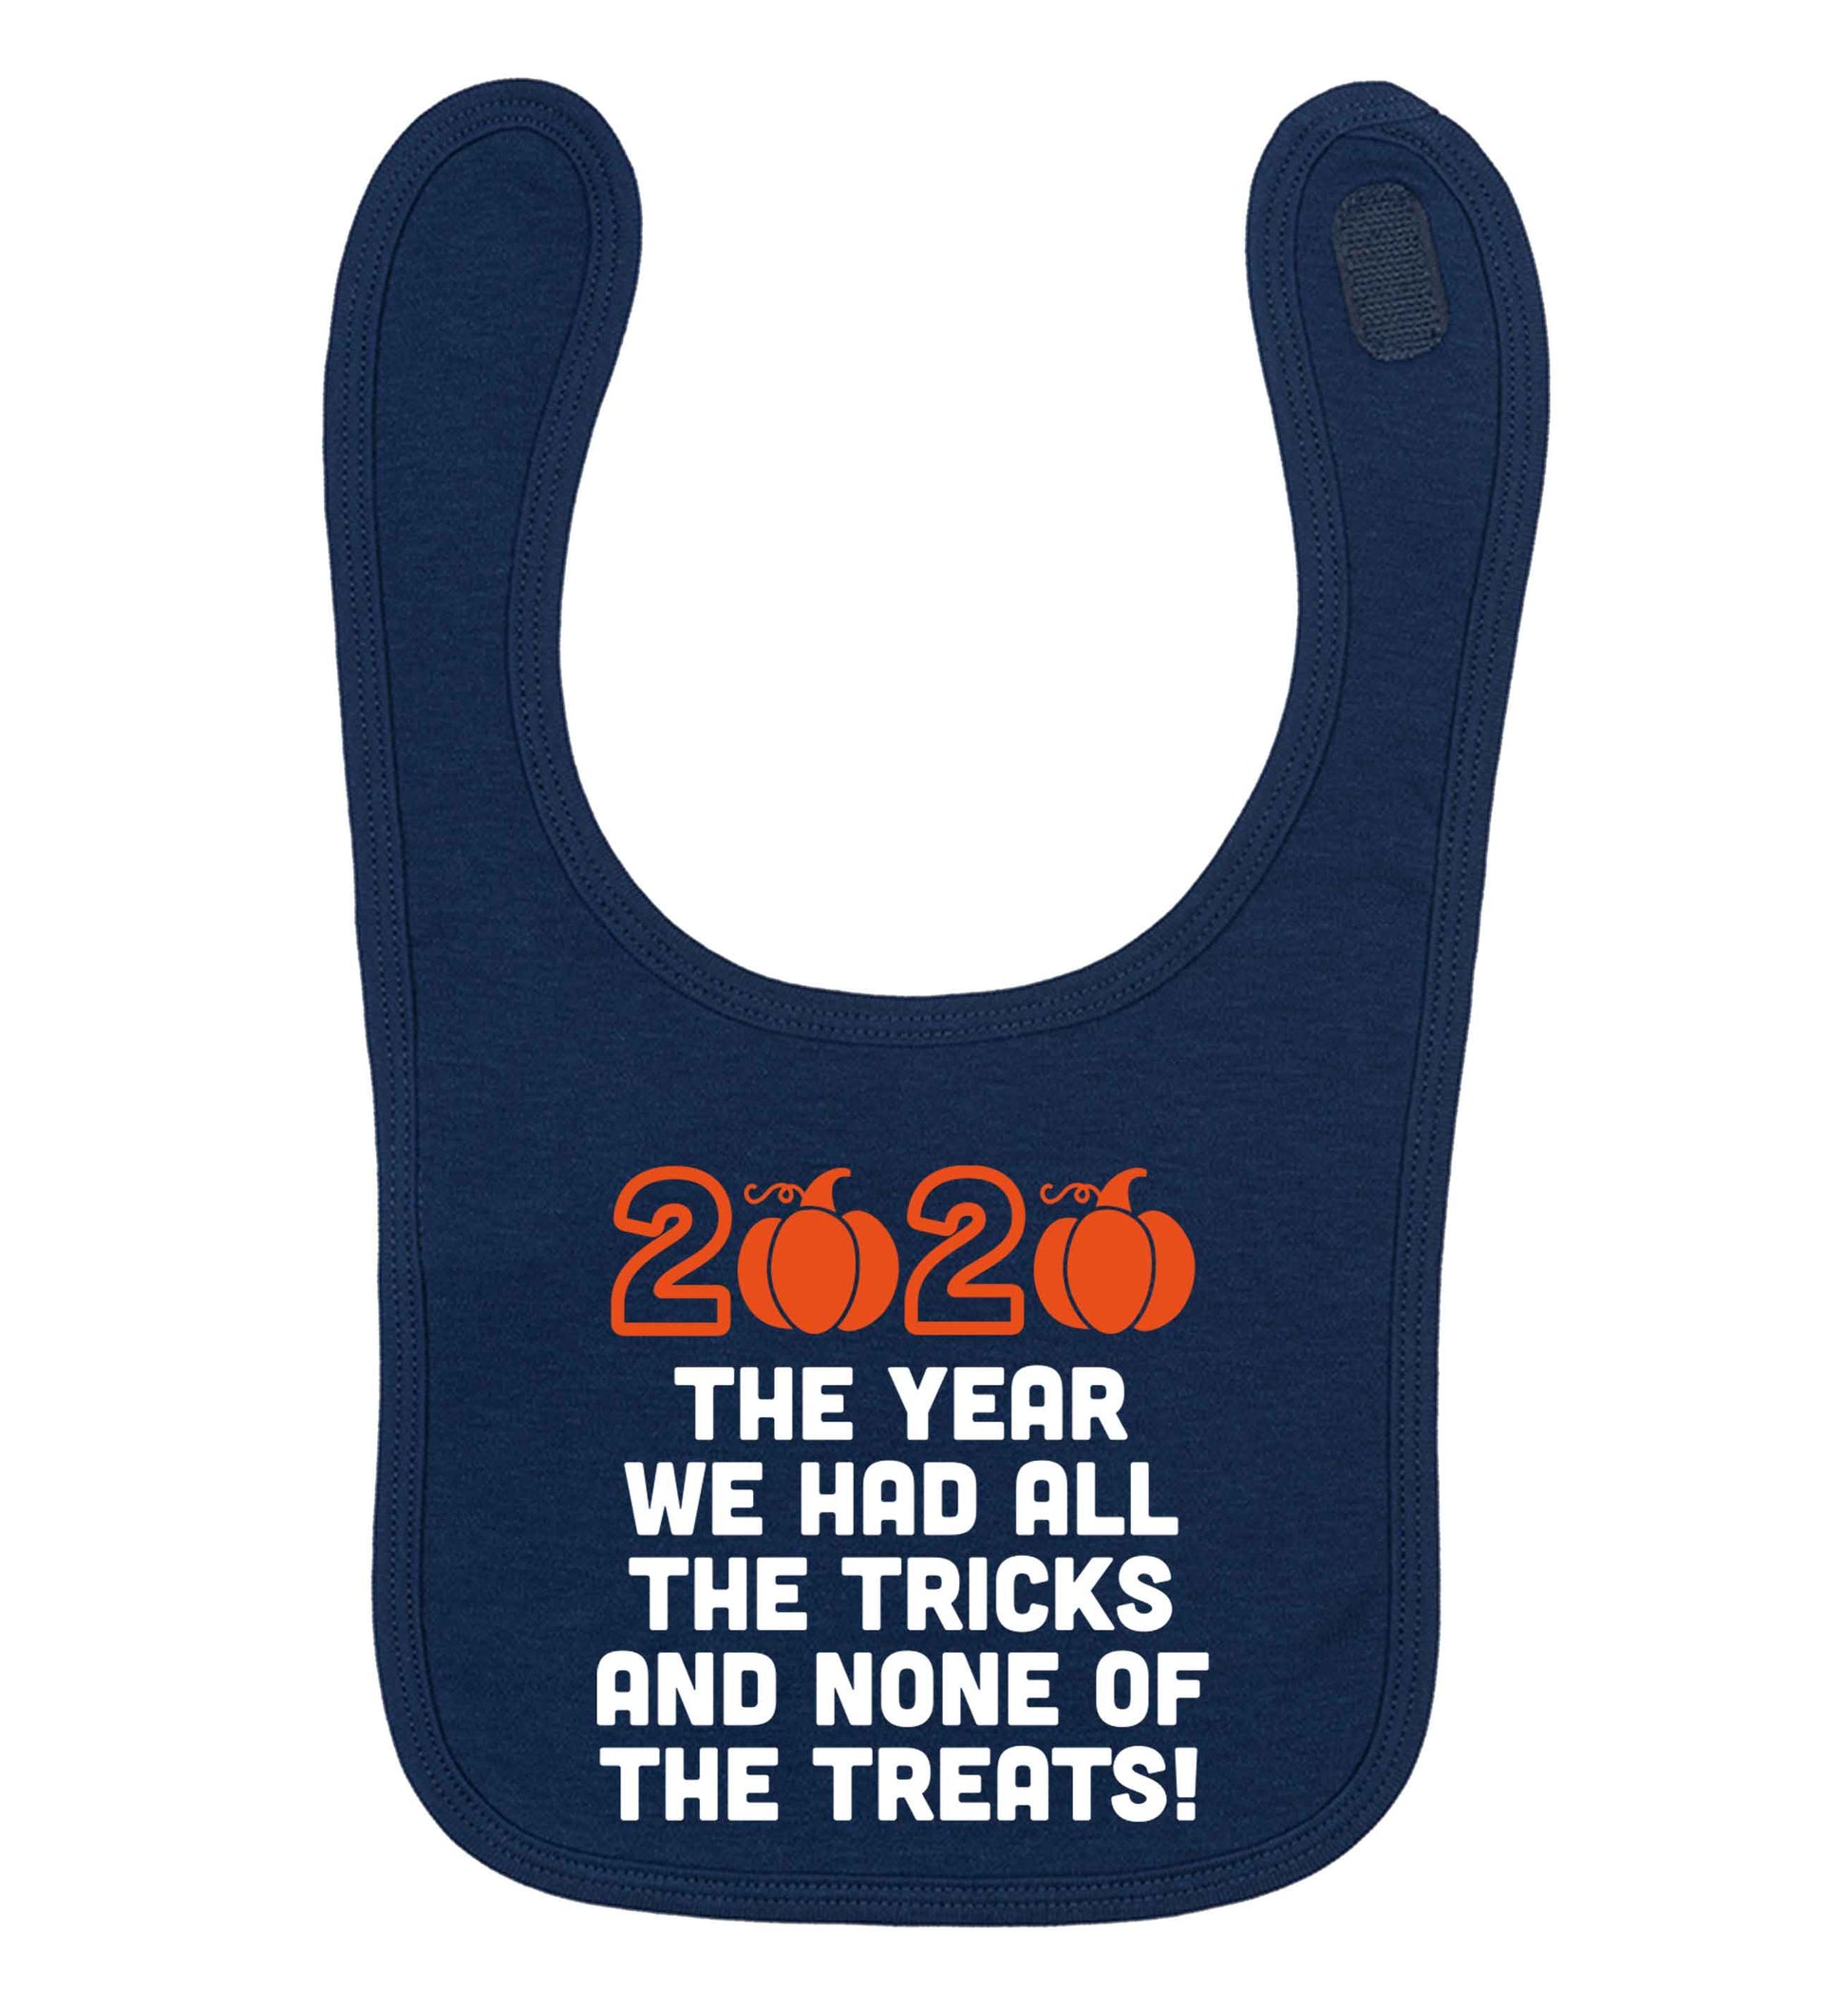 2020 The year we had all of the tricks and none of the treats navy baby bib